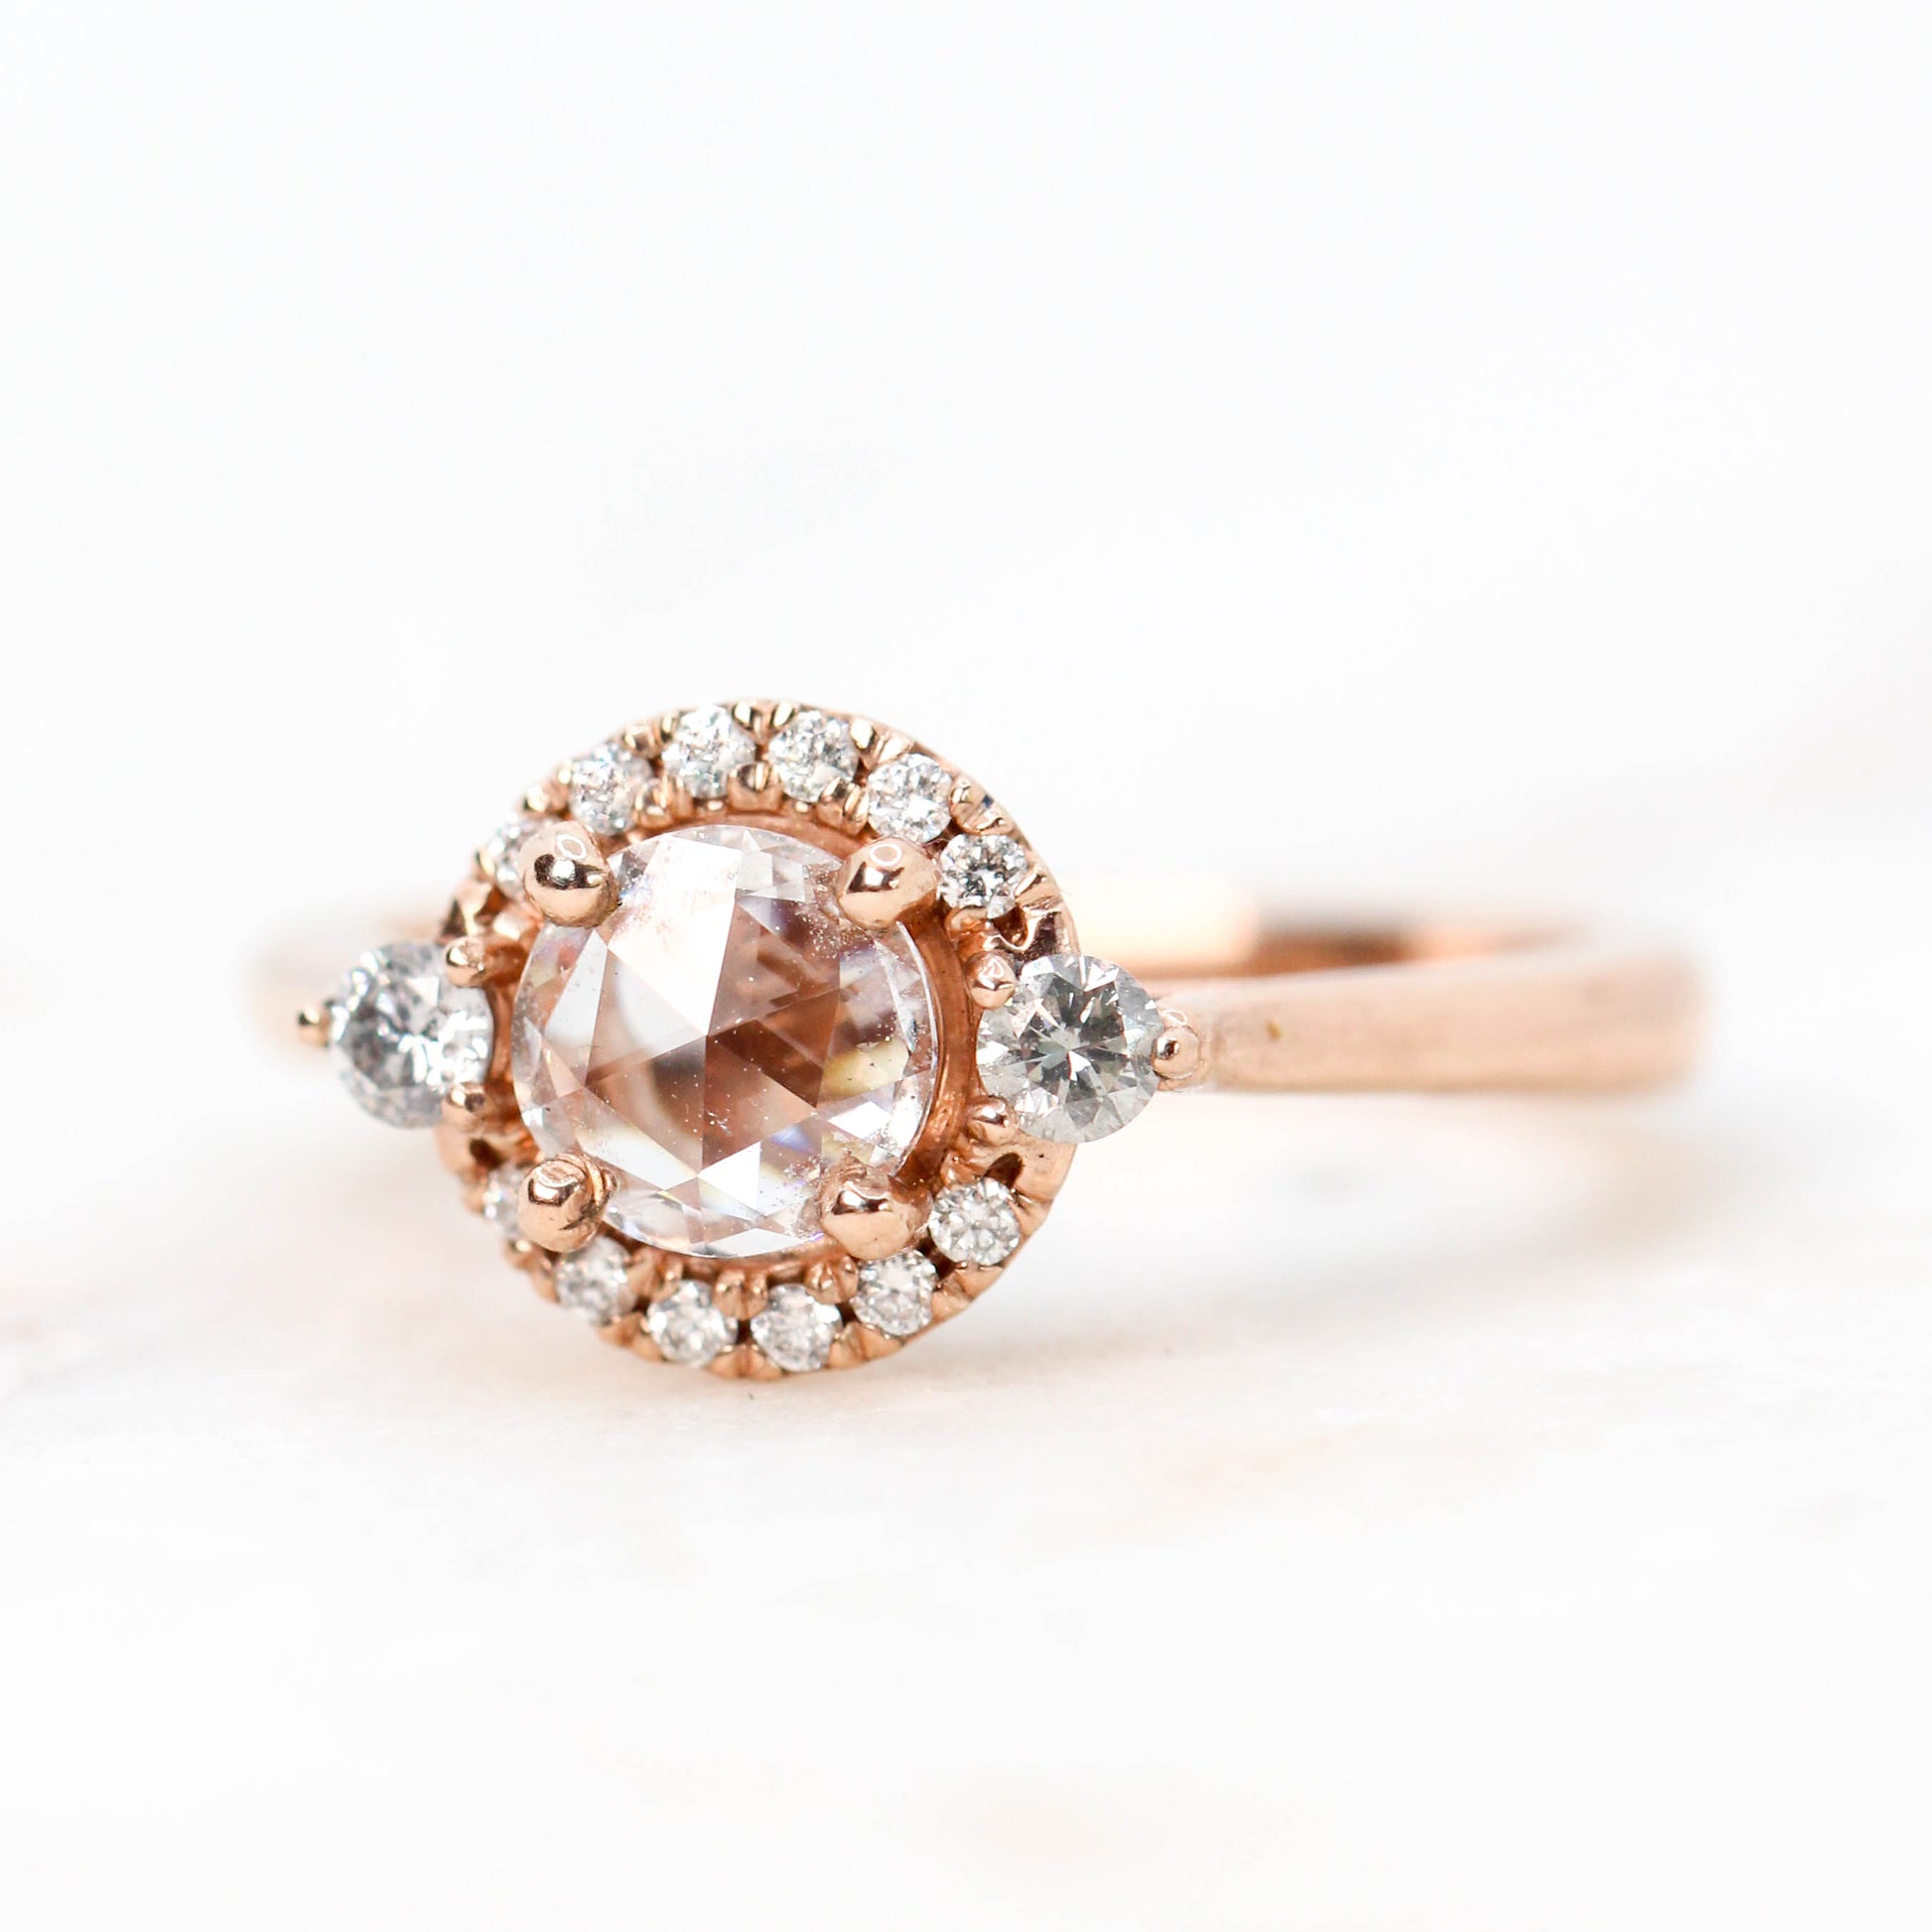 Vanessa Ring with 0.41 Carat Rose Cut Clear Round Diamond and Natural Diamond Accents in 10k Rose Gold - Ready to Size and Ship - Midwinter Co. Alternative Bridal Rings and Modern Fine Jewelry